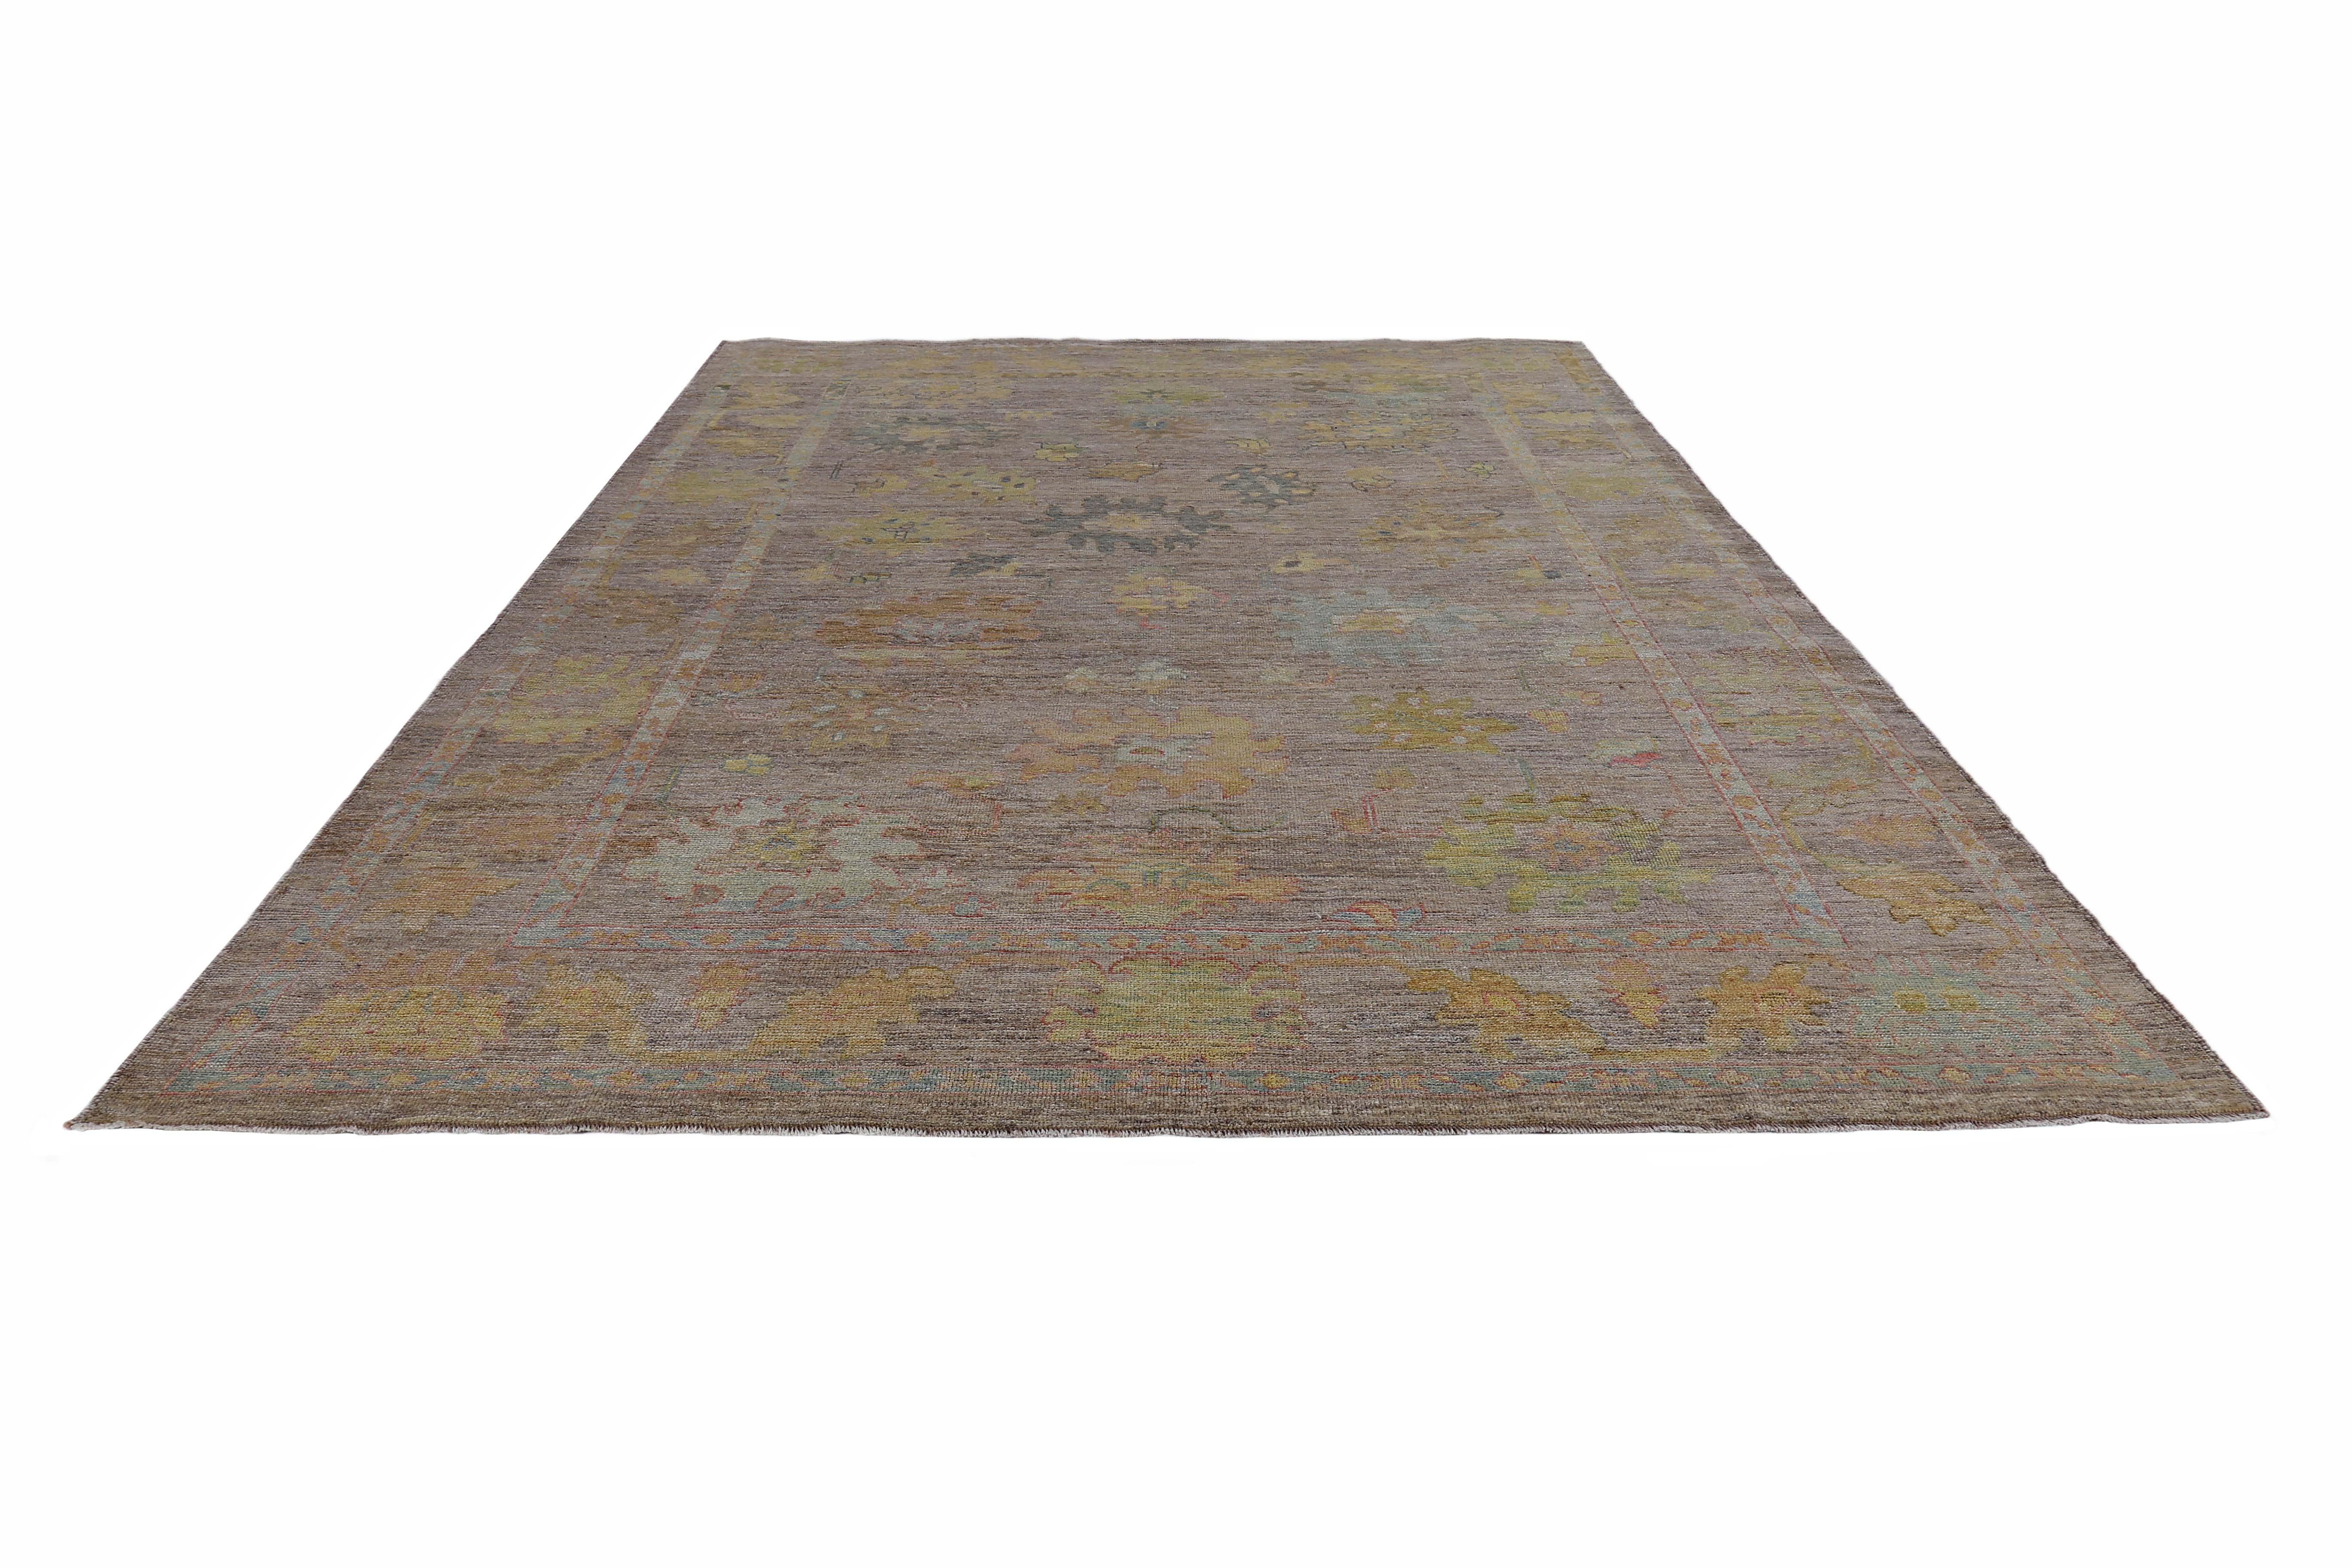 Turkish rug made of handwoven sheep’s wool of the finest quality. It’s colored with organic vegetable dyes that are certified safe for humans and pets alike. It features yellow, blue and green flower heads on a beautiful brown field. Flower patterns